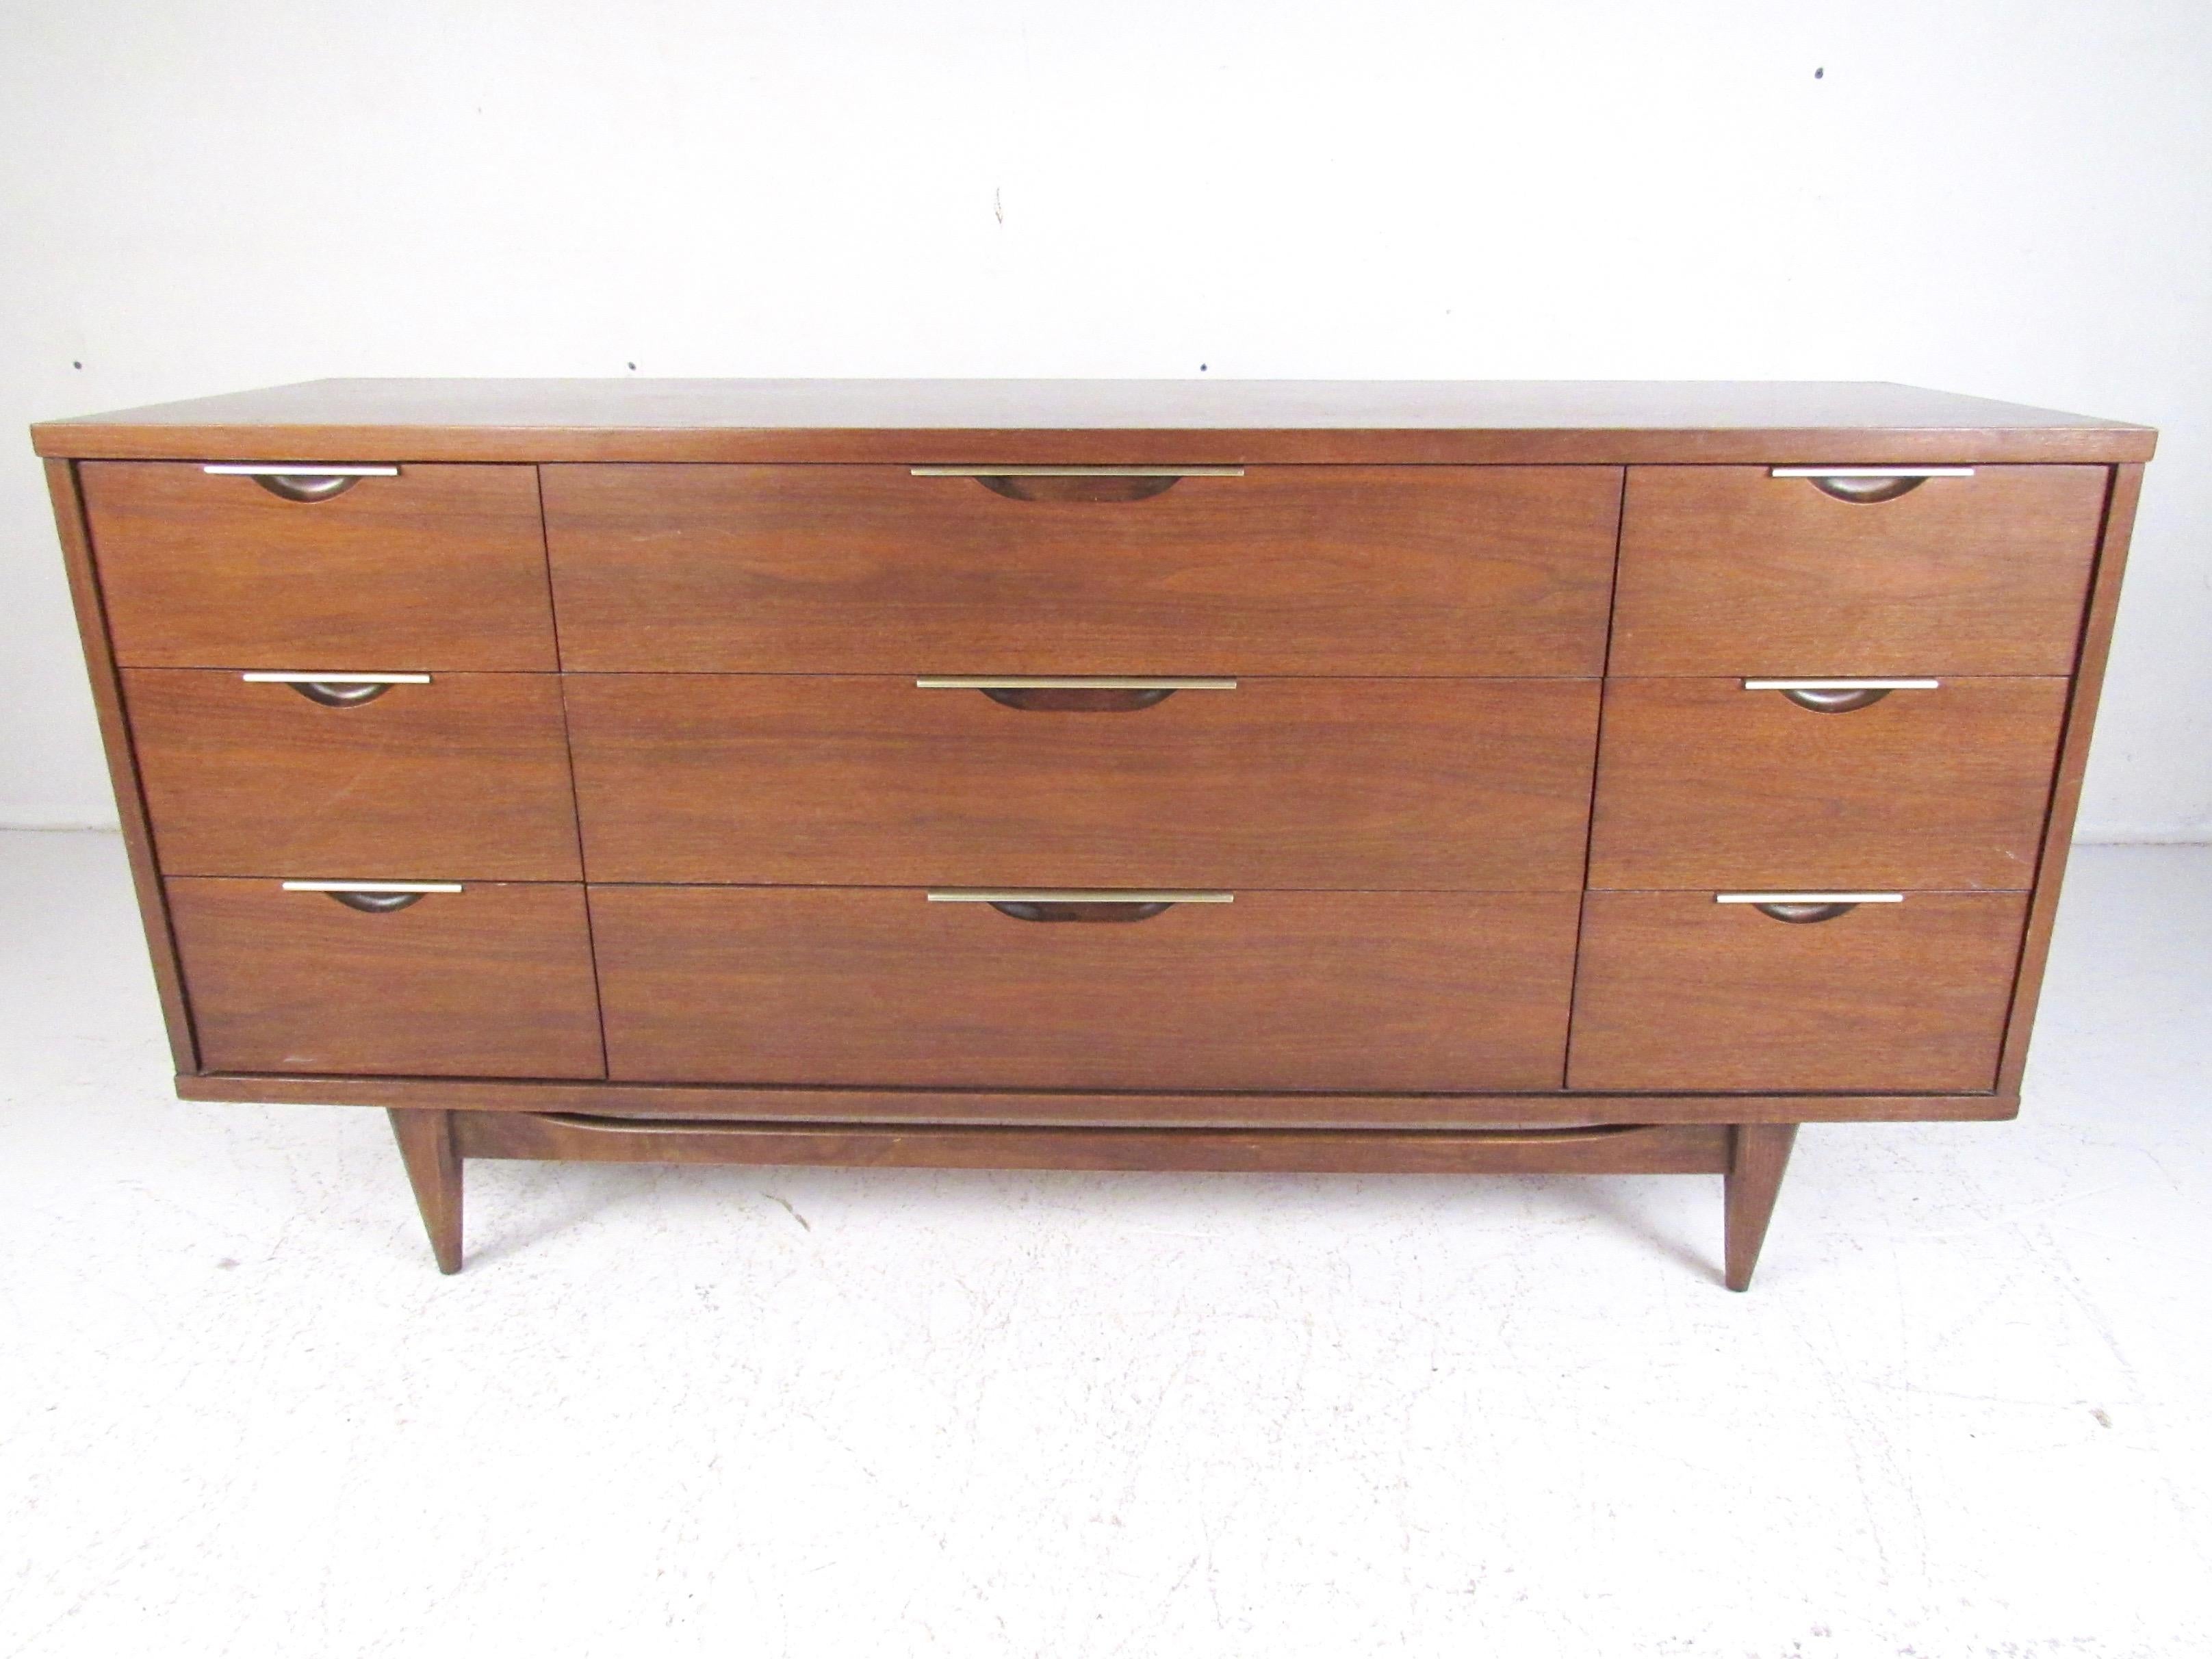 This nine-drawer bedroom dresser by Kent Coffey features walnut finish, metallic trim, and tapered midcentury style legs. Spacious dove-tailed drawers add plenty of storage to bedroom or otherwise, while the striking vintage modern design of this